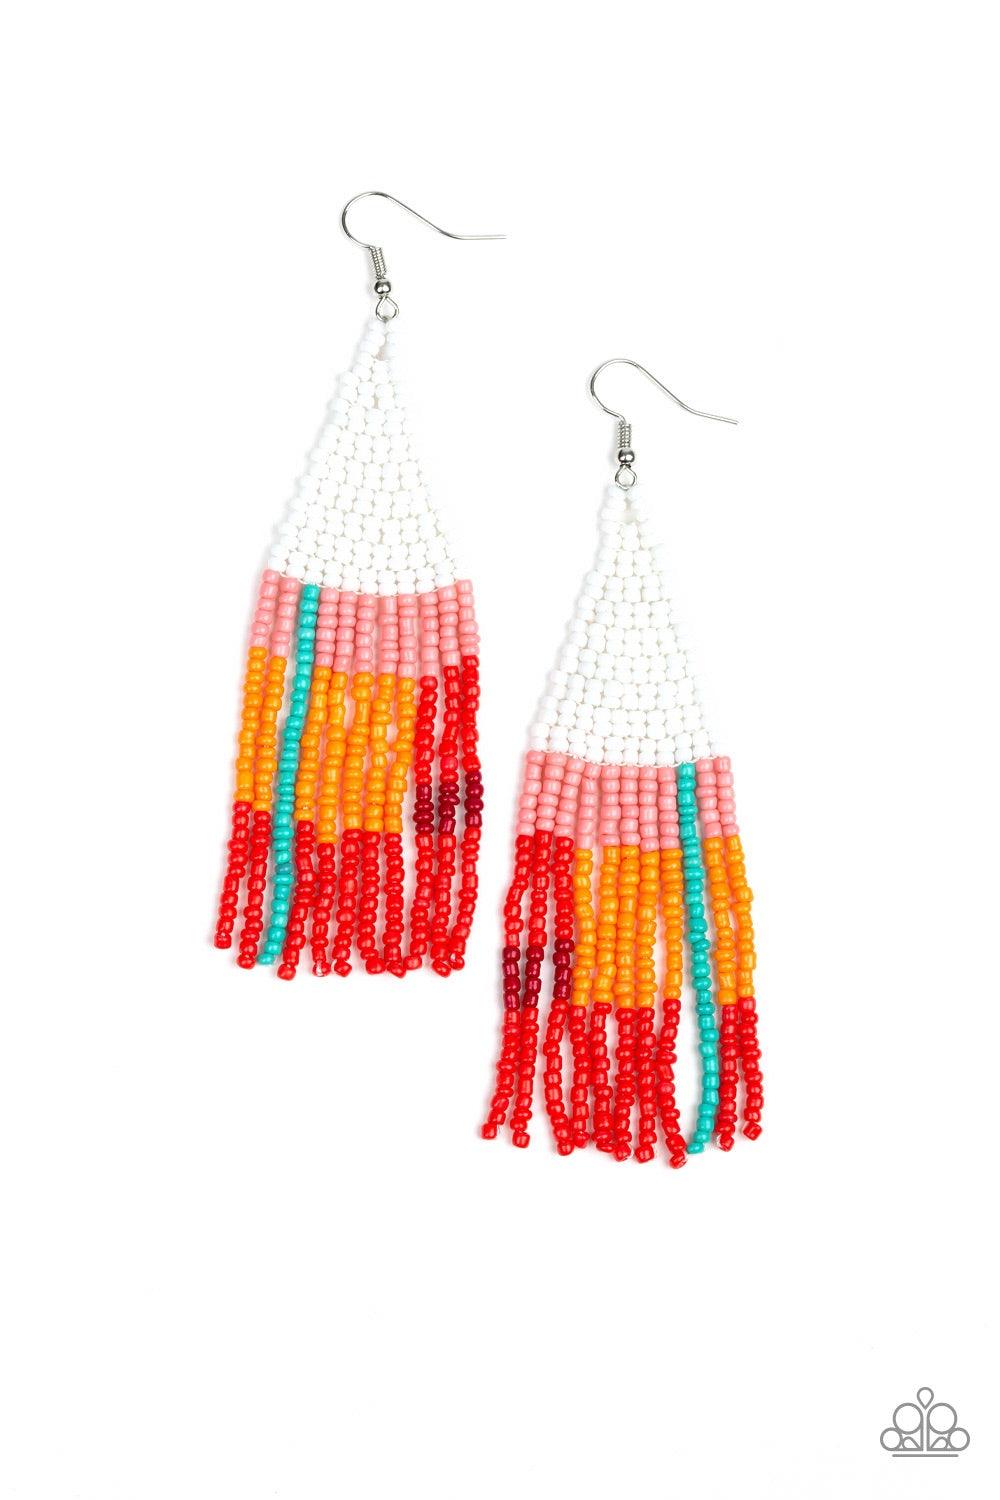 Paparazzi Accessories Beaded Boho - White Featuring white, pink, blue, orange, and red seed beads, dainty beaded tassels swing from a beaded triangular frame for a colorful tribal look. Earring attaches to a standard fishhook fitting. Jewelry